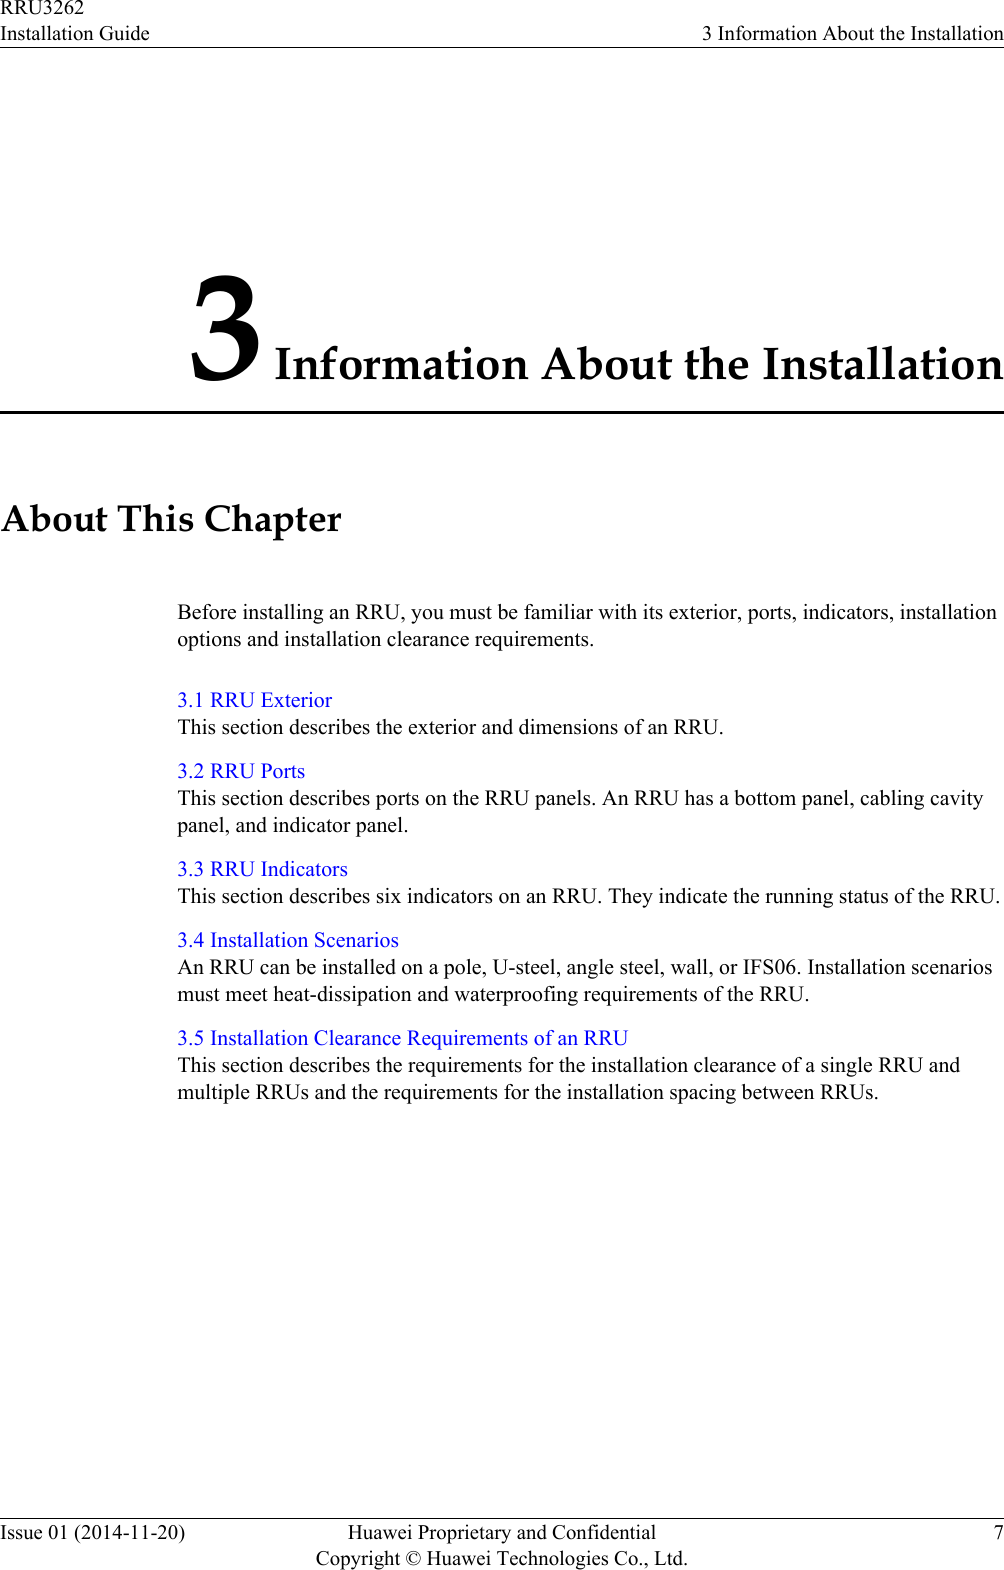 3 Information About the InstallationAbout This ChapterBefore installing an RRU, you must be familiar with its exterior, ports, indicators, installationoptions and installation clearance requirements.3.1 RRU ExteriorThis section describes the exterior and dimensions of an RRU.3.2 RRU PortsThis section describes ports on the RRU panels. An RRU has a bottom panel, cabling cavitypanel, and indicator panel.3.3 RRU IndicatorsThis section describes six indicators on an RRU. They indicate the running status of the RRU.3.4 Installation ScenariosAn RRU can be installed on a pole, U-steel, angle steel, wall, or IFS06. Installation scenariosmust meet heat-dissipation and waterproofing requirements of the RRU.3.5 Installation Clearance Requirements of an RRUThis section describes the requirements for the installation clearance of a single RRU andmultiple RRUs and the requirements for the installation spacing between RRUs.RRU3262Installation Guide 3 Information About the InstallationIssue 01 (2014-11-20) Huawei Proprietary and ConfidentialCopyright © Huawei Technologies Co., Ltd.7